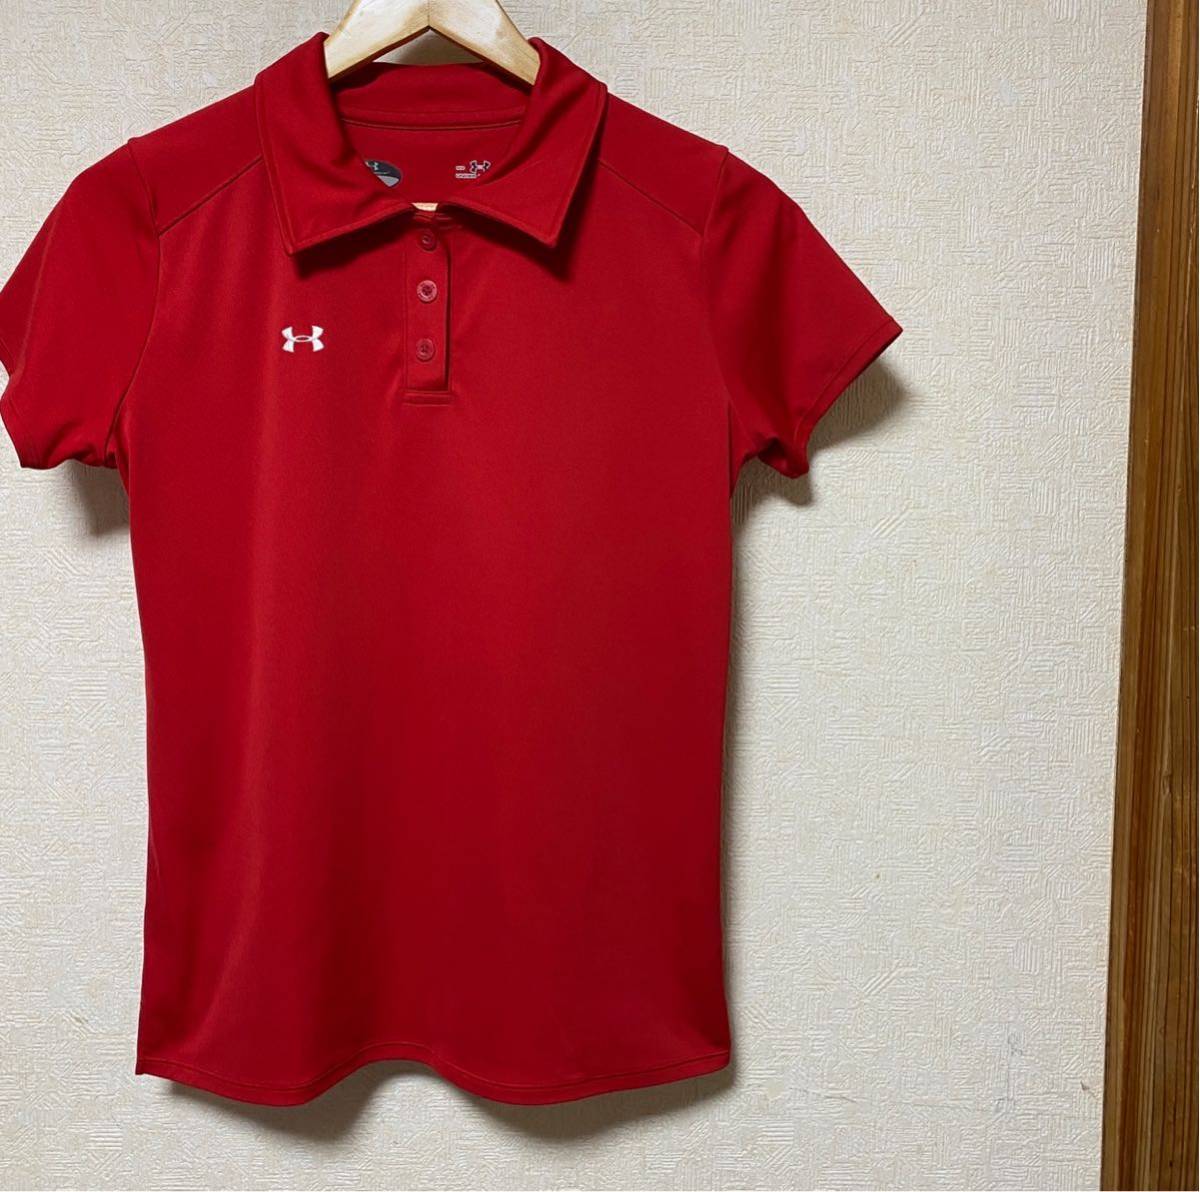  Under Armor red polo-shirt 